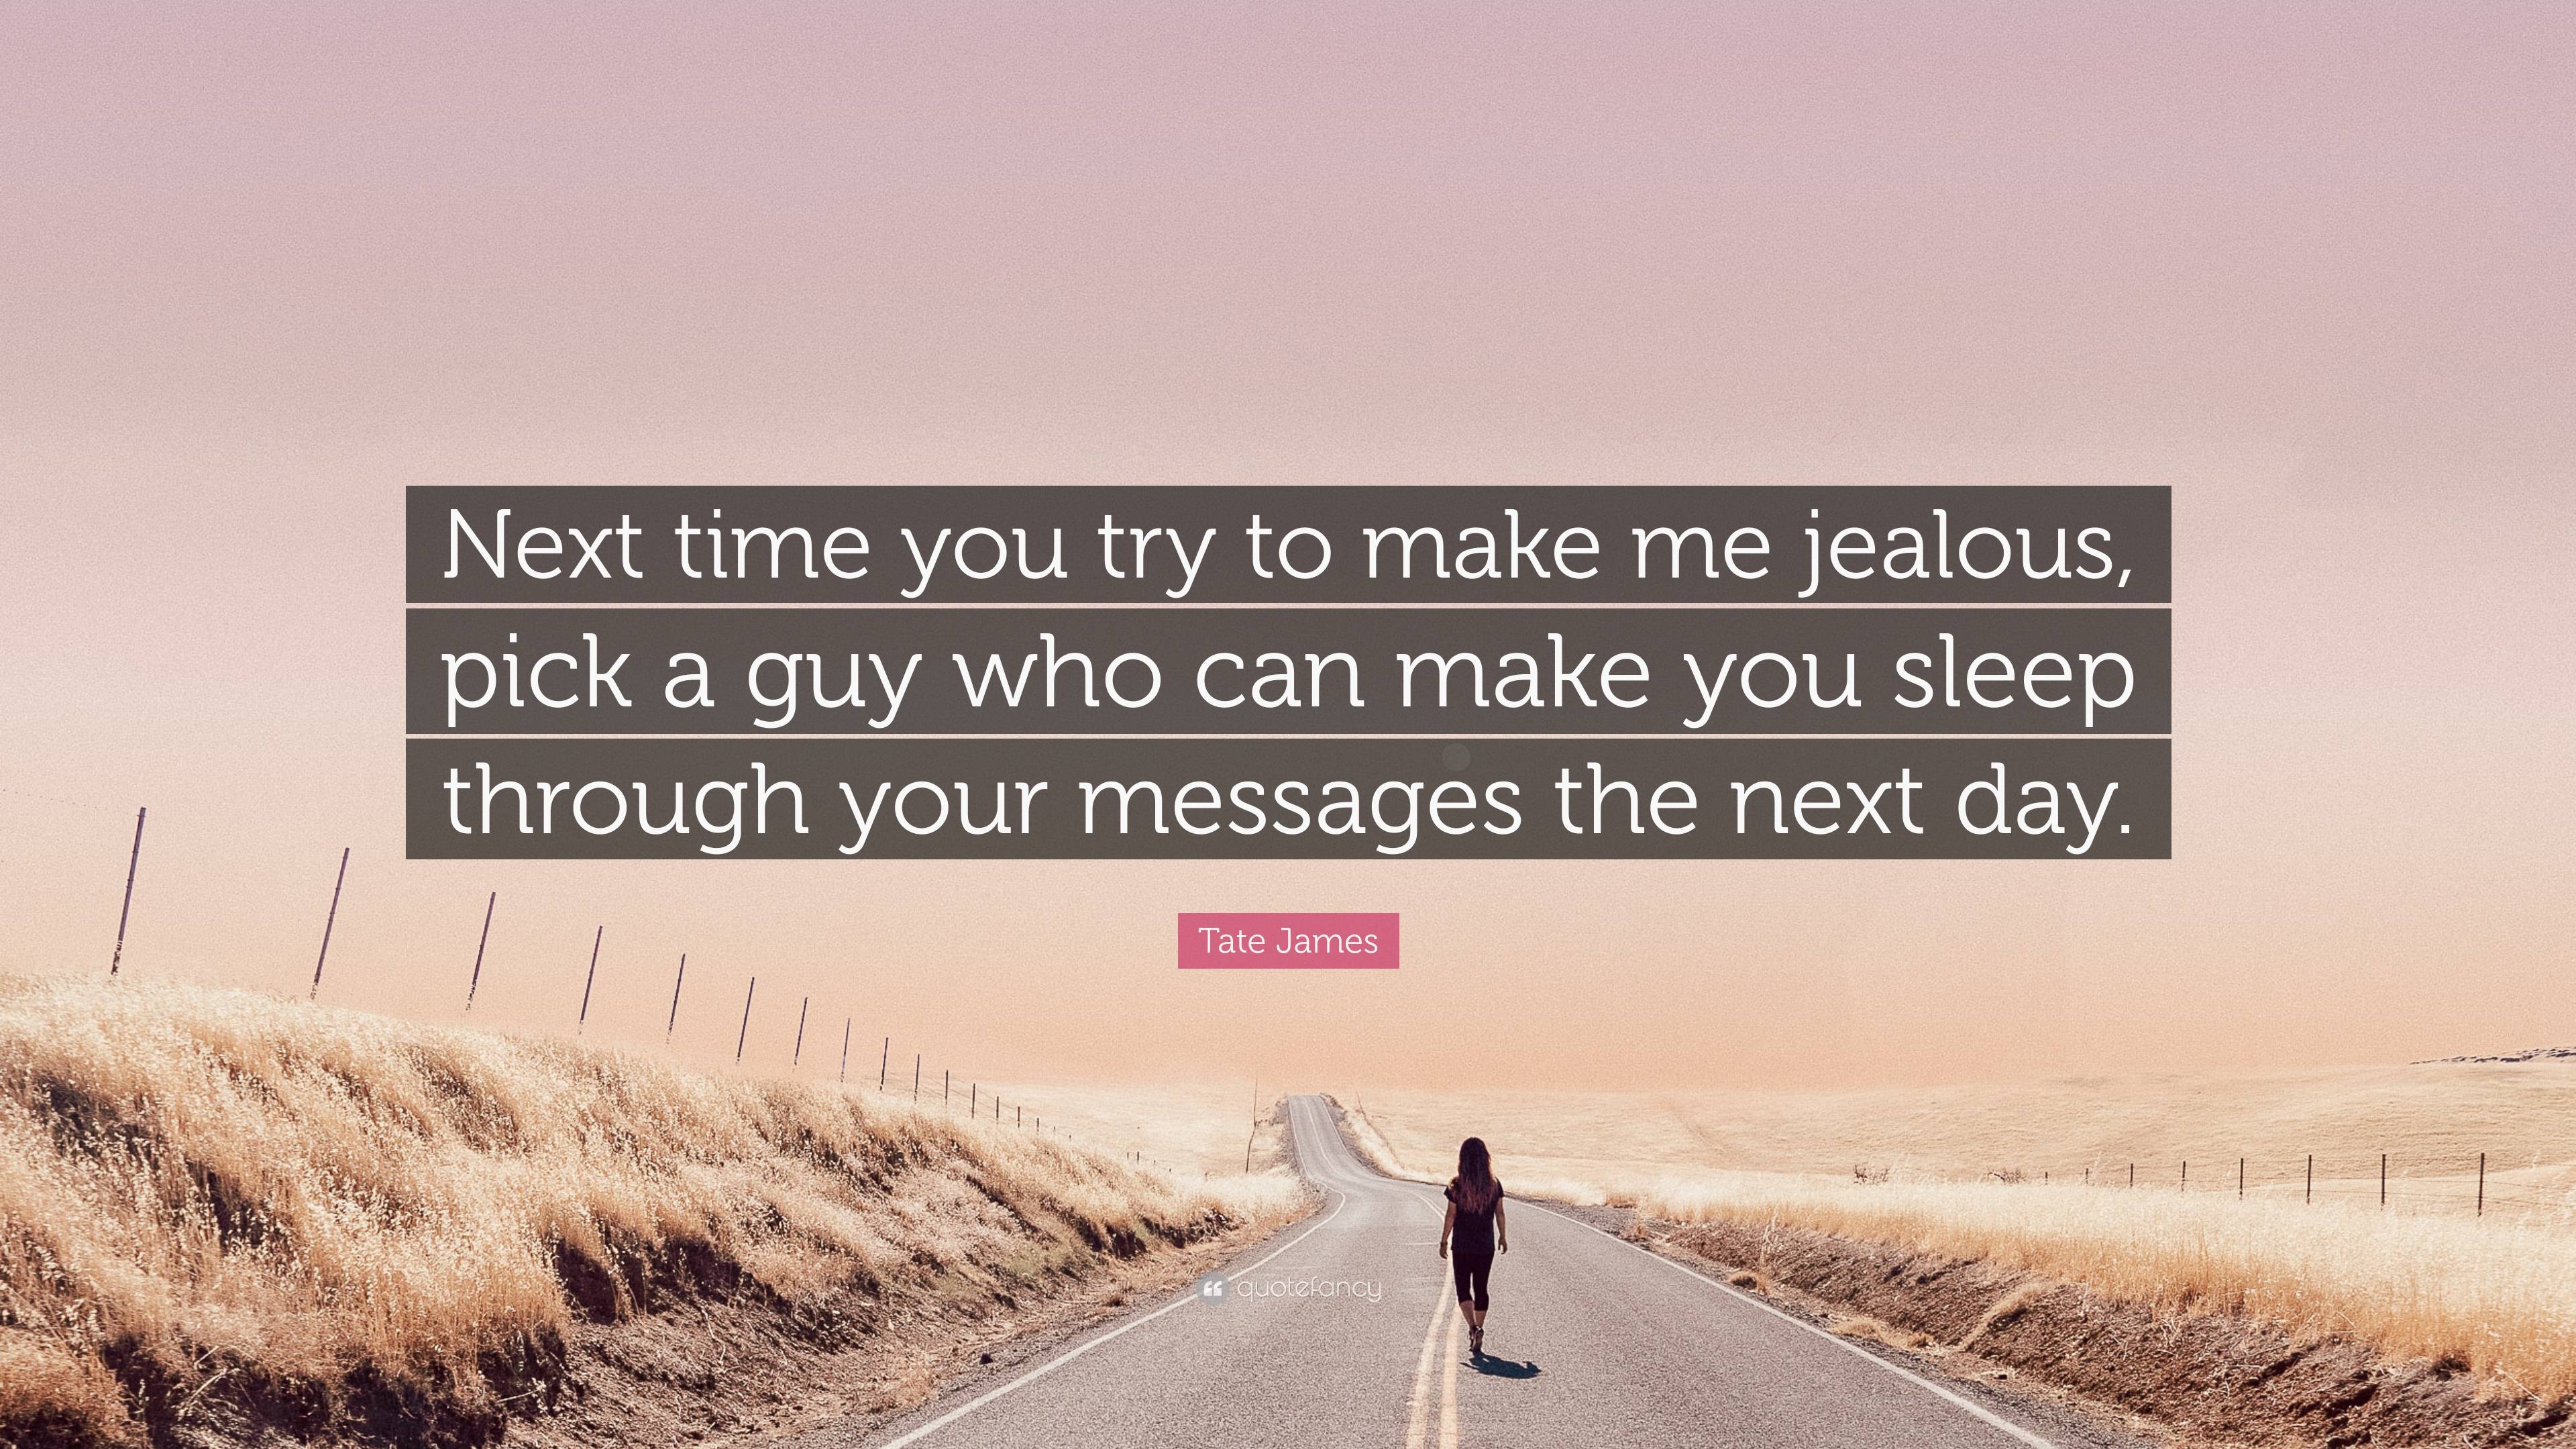 jealousy quotes for guys